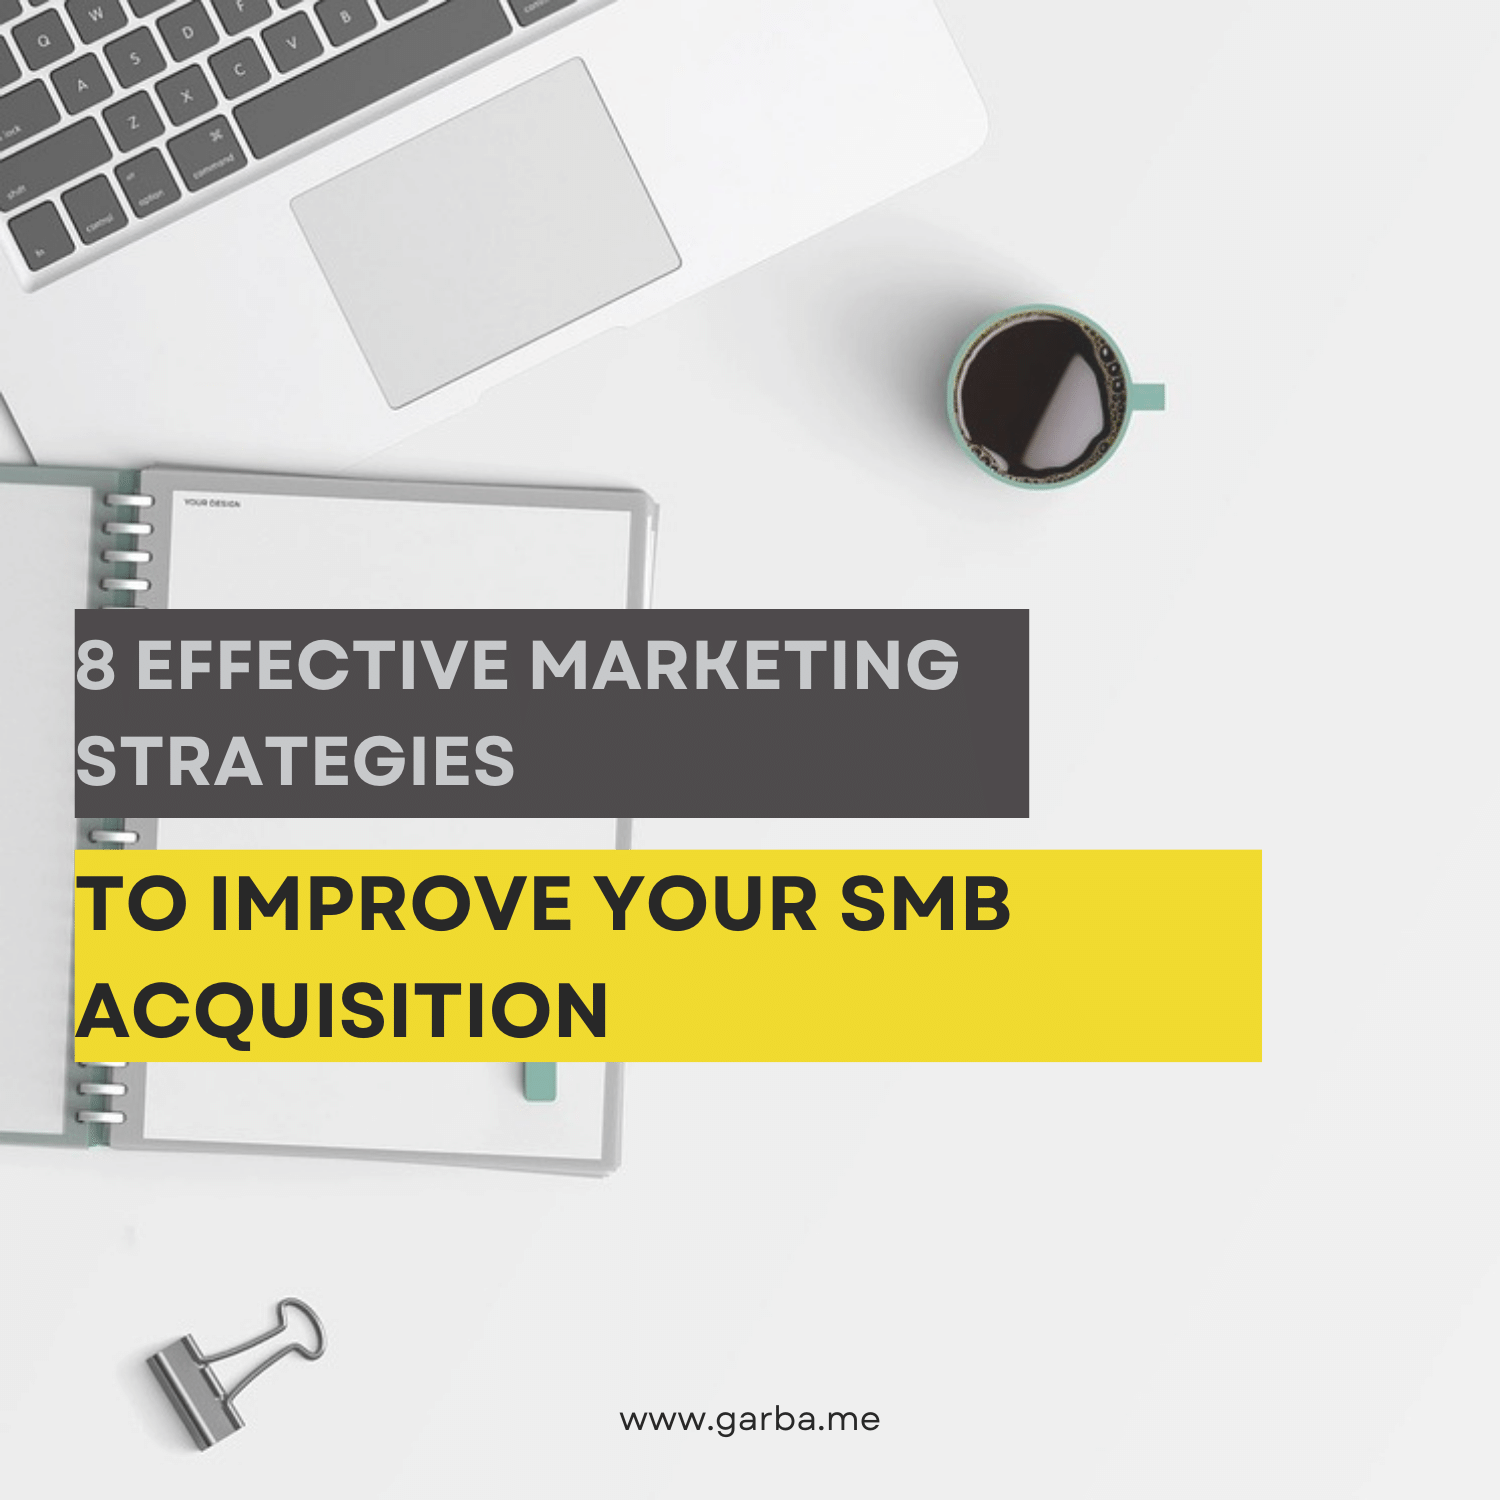 8 Effective Marketing Strategies to Improve Your SMB Acquisition